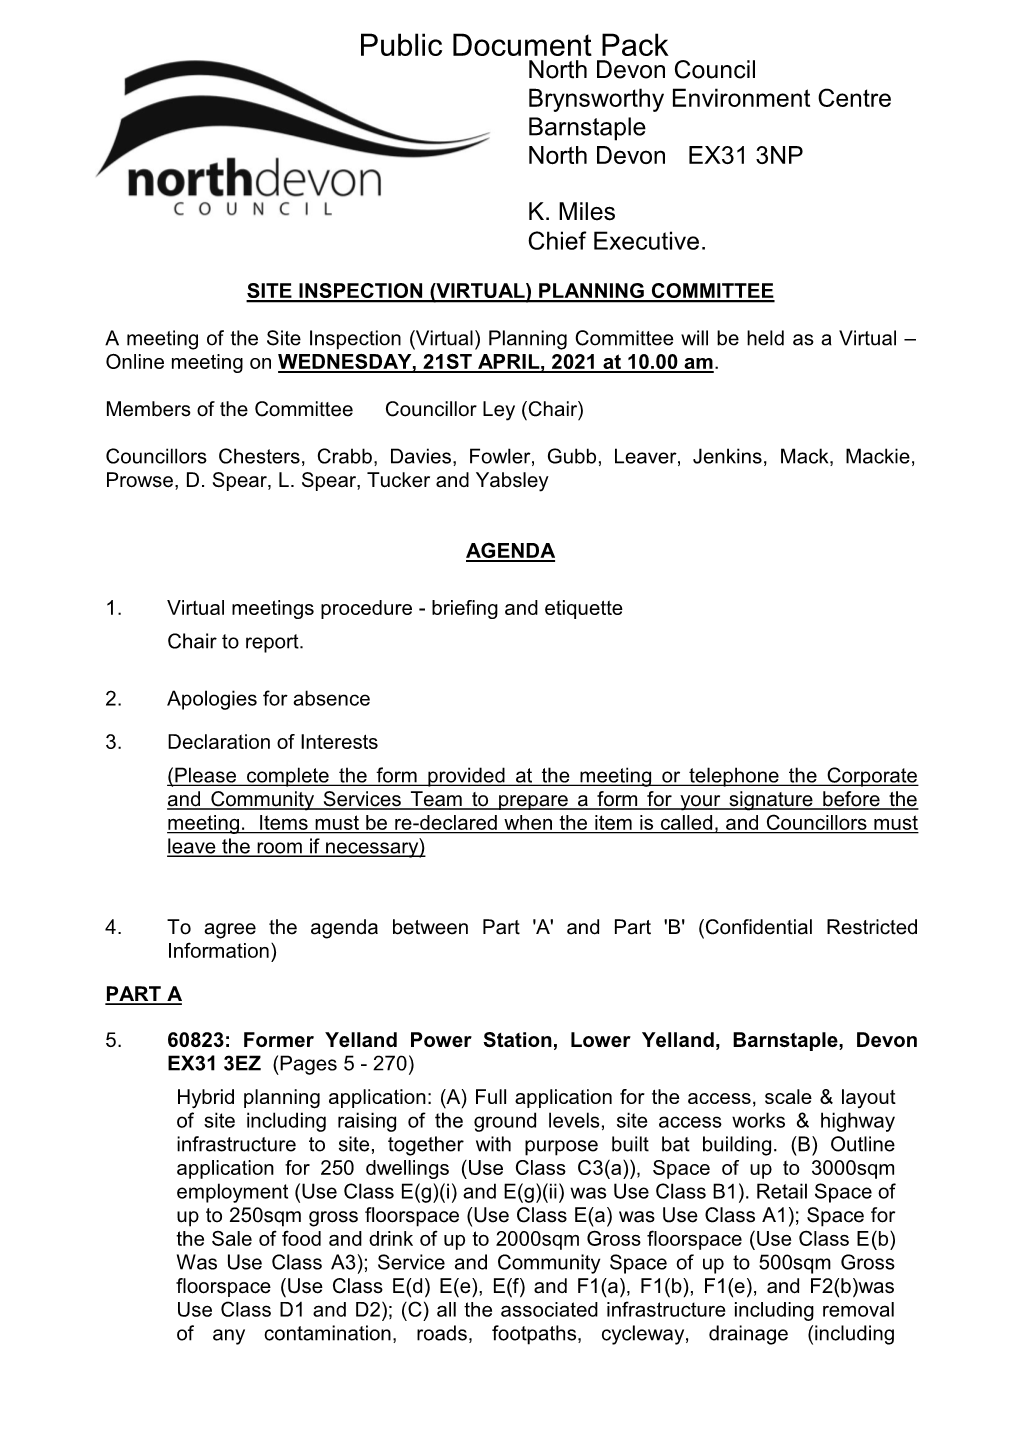 (Public Pack)Agenda Document for Planning Committee, 21/04/2021